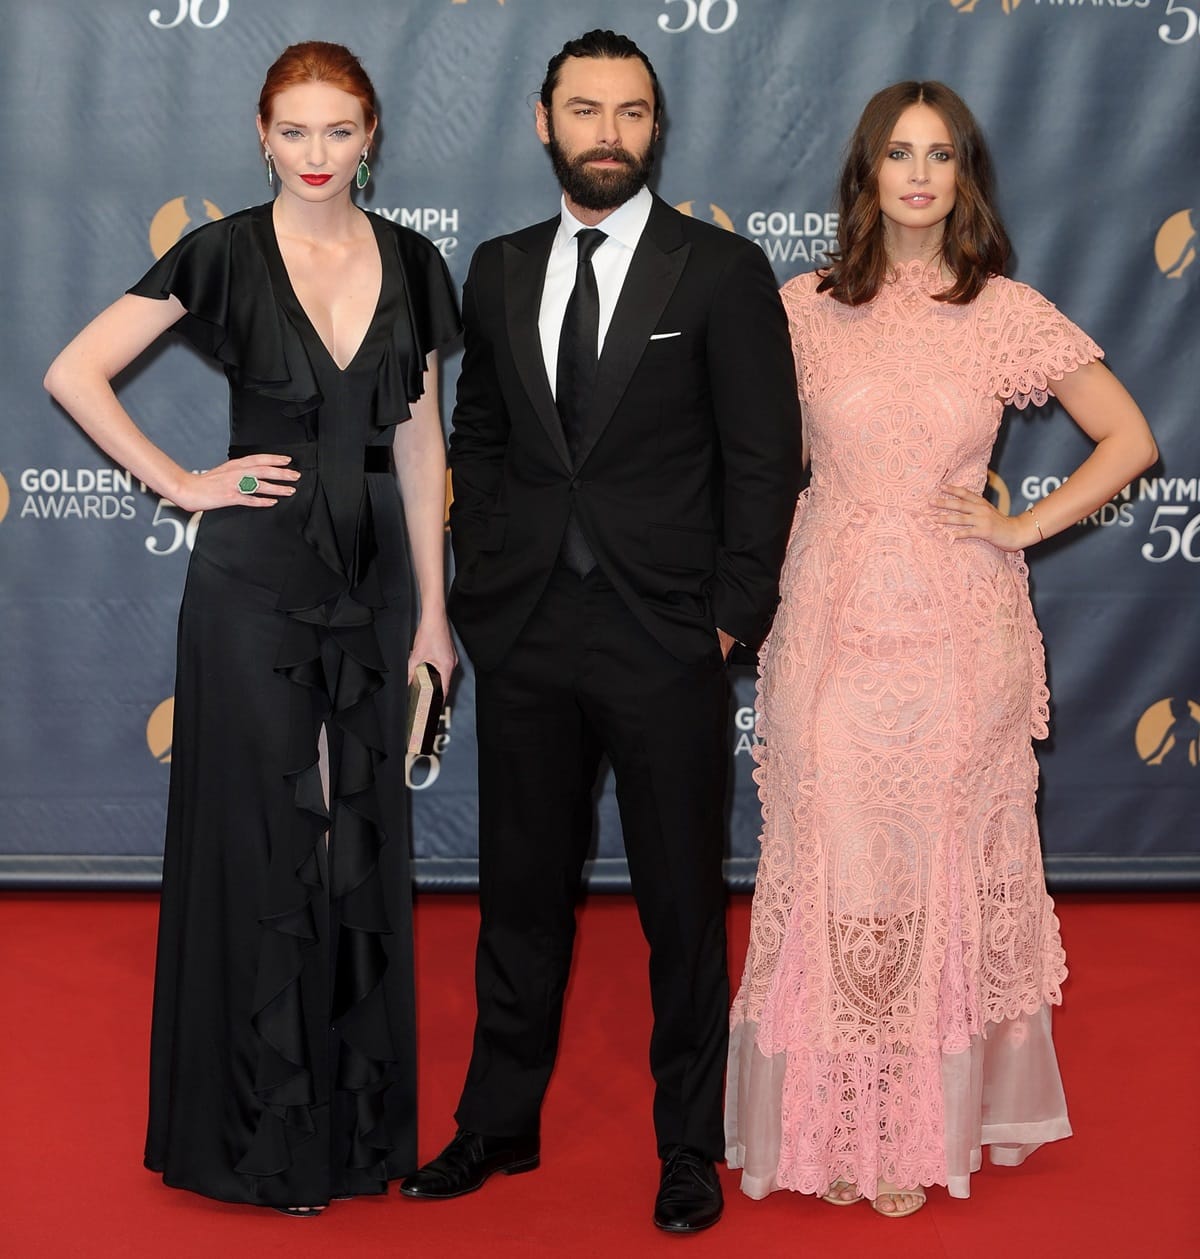 On the red carpet at the 56th Monte Carlo TV Festival Closing Ceremony and Golden Nymph Awards at The Grimaldi Forum on June 16, 2016, in Monte-Carlo, Monaco, Eleanor Tomlinson stood at 5ft 7 ½ inches (171.5 cm), Heida Reed was 5ft 7 inches (170.2 cm) tall, and Aidan Turner towered at 5ft 10 ½ inches (179.1 cm)